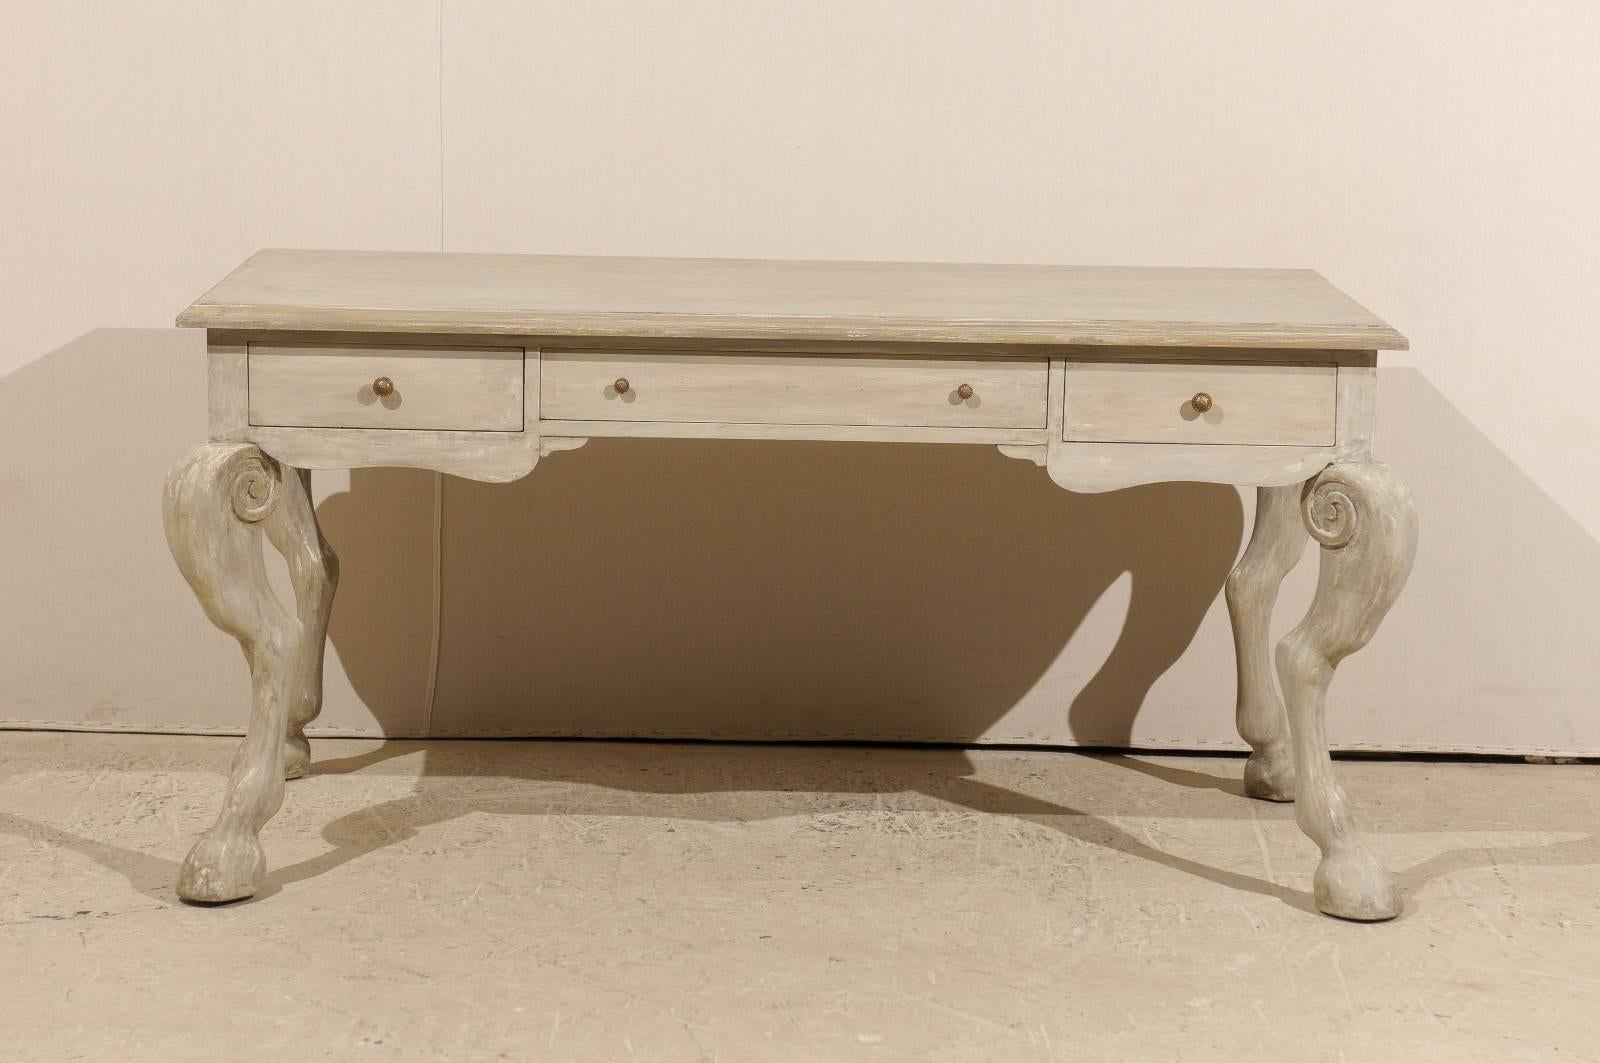 A painted wood desk with unique carved animal legs. This wooden desk features three drawers over four animal legs with hooved feet and scroll design at leg tops. This is from the 20th century. The color is grey green with some darker grey green